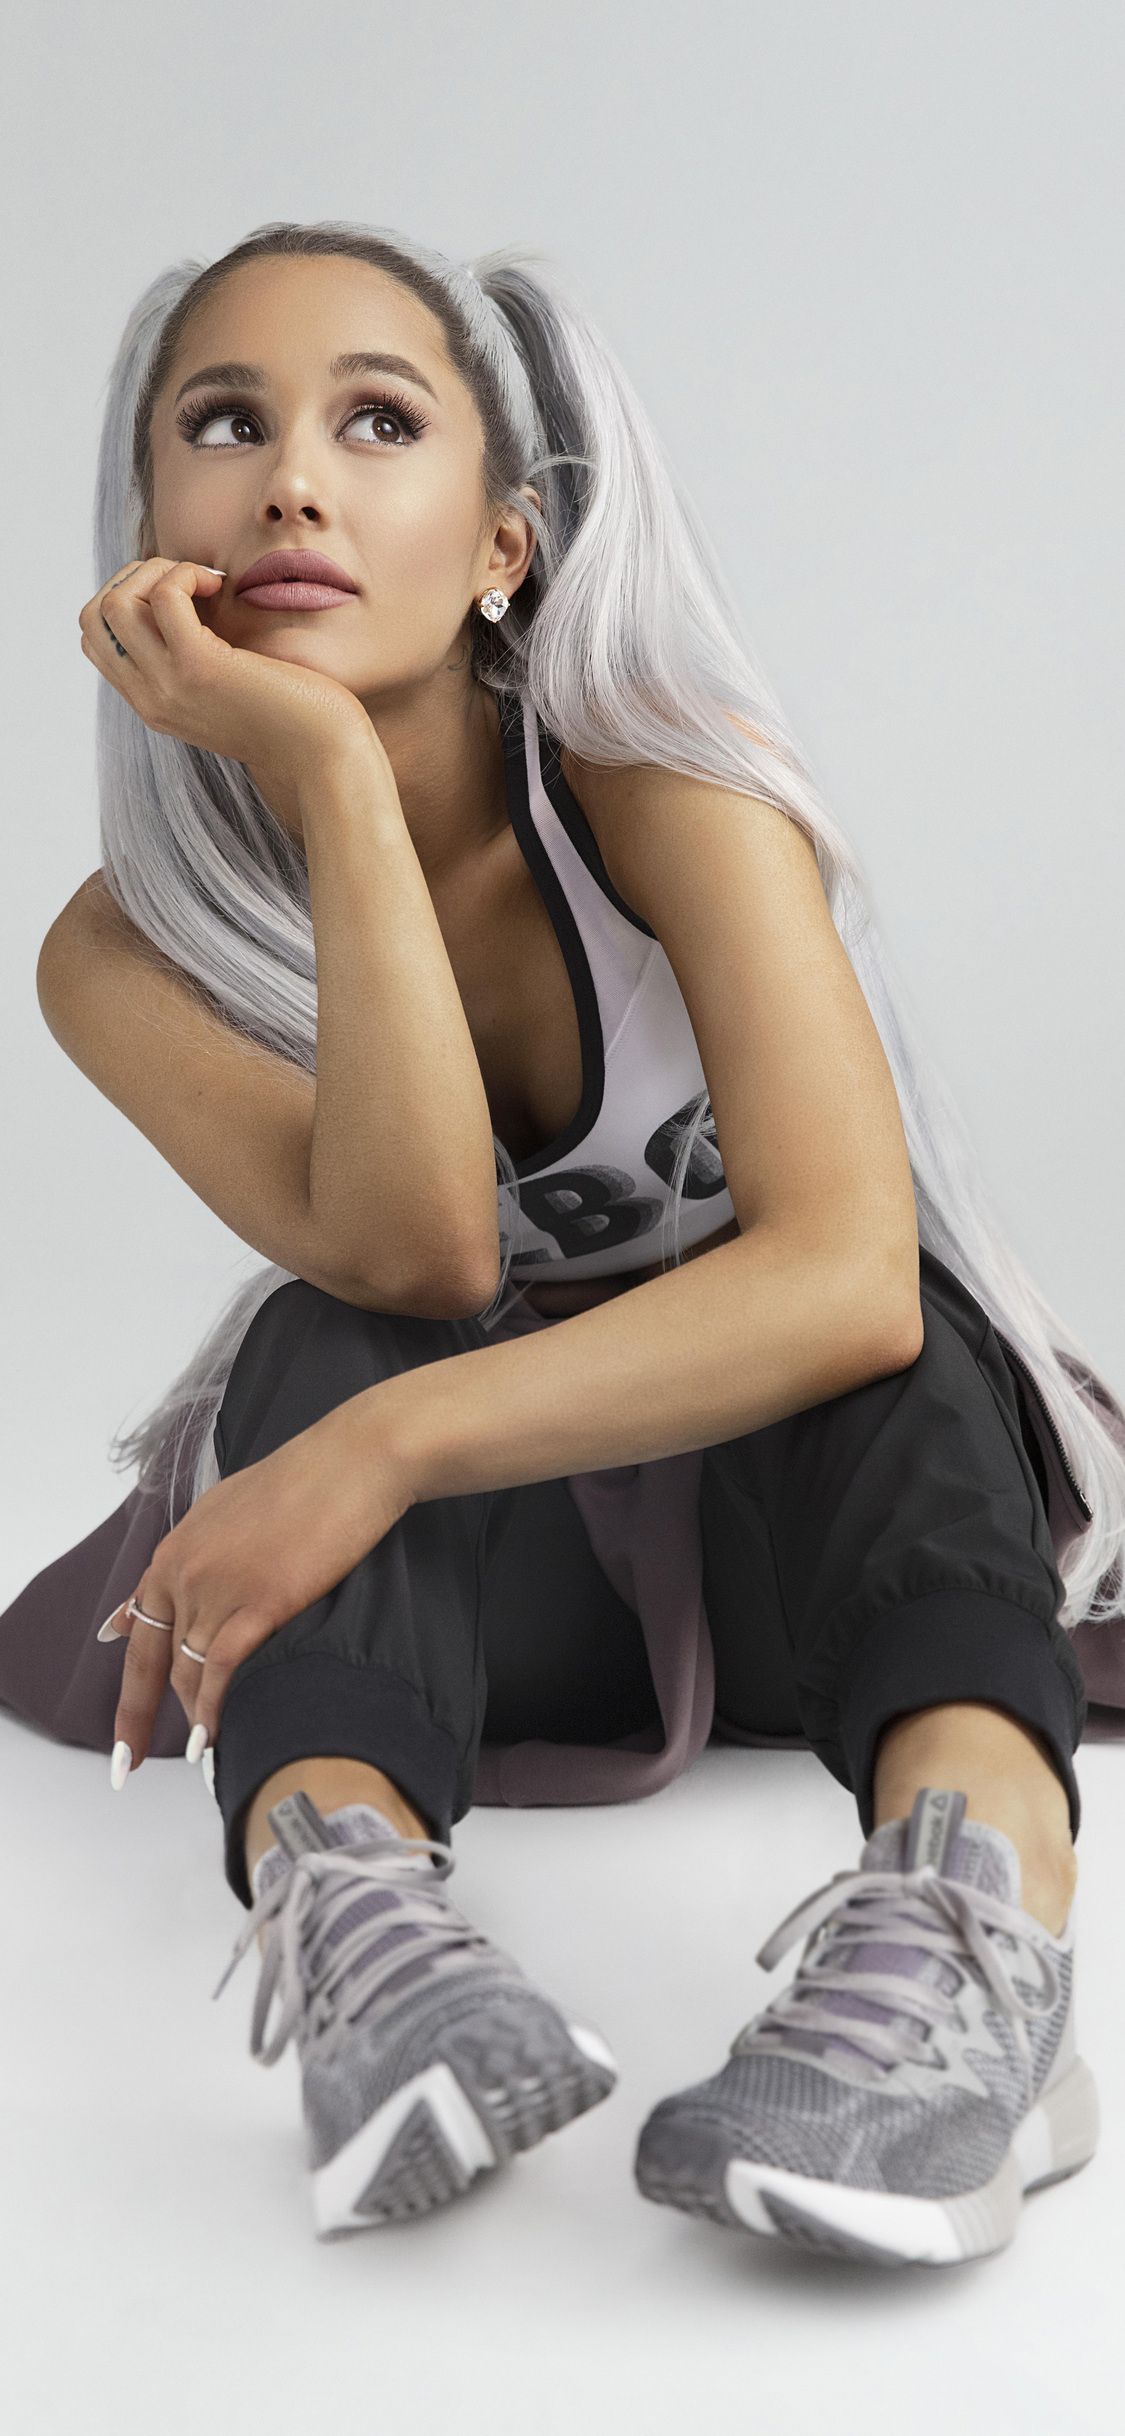 Ariana Grande Reebok 5k 2018 iPhone XS, iPhone iPhone X HD 4k Wallpaper, Image, Background, Photo and Picture